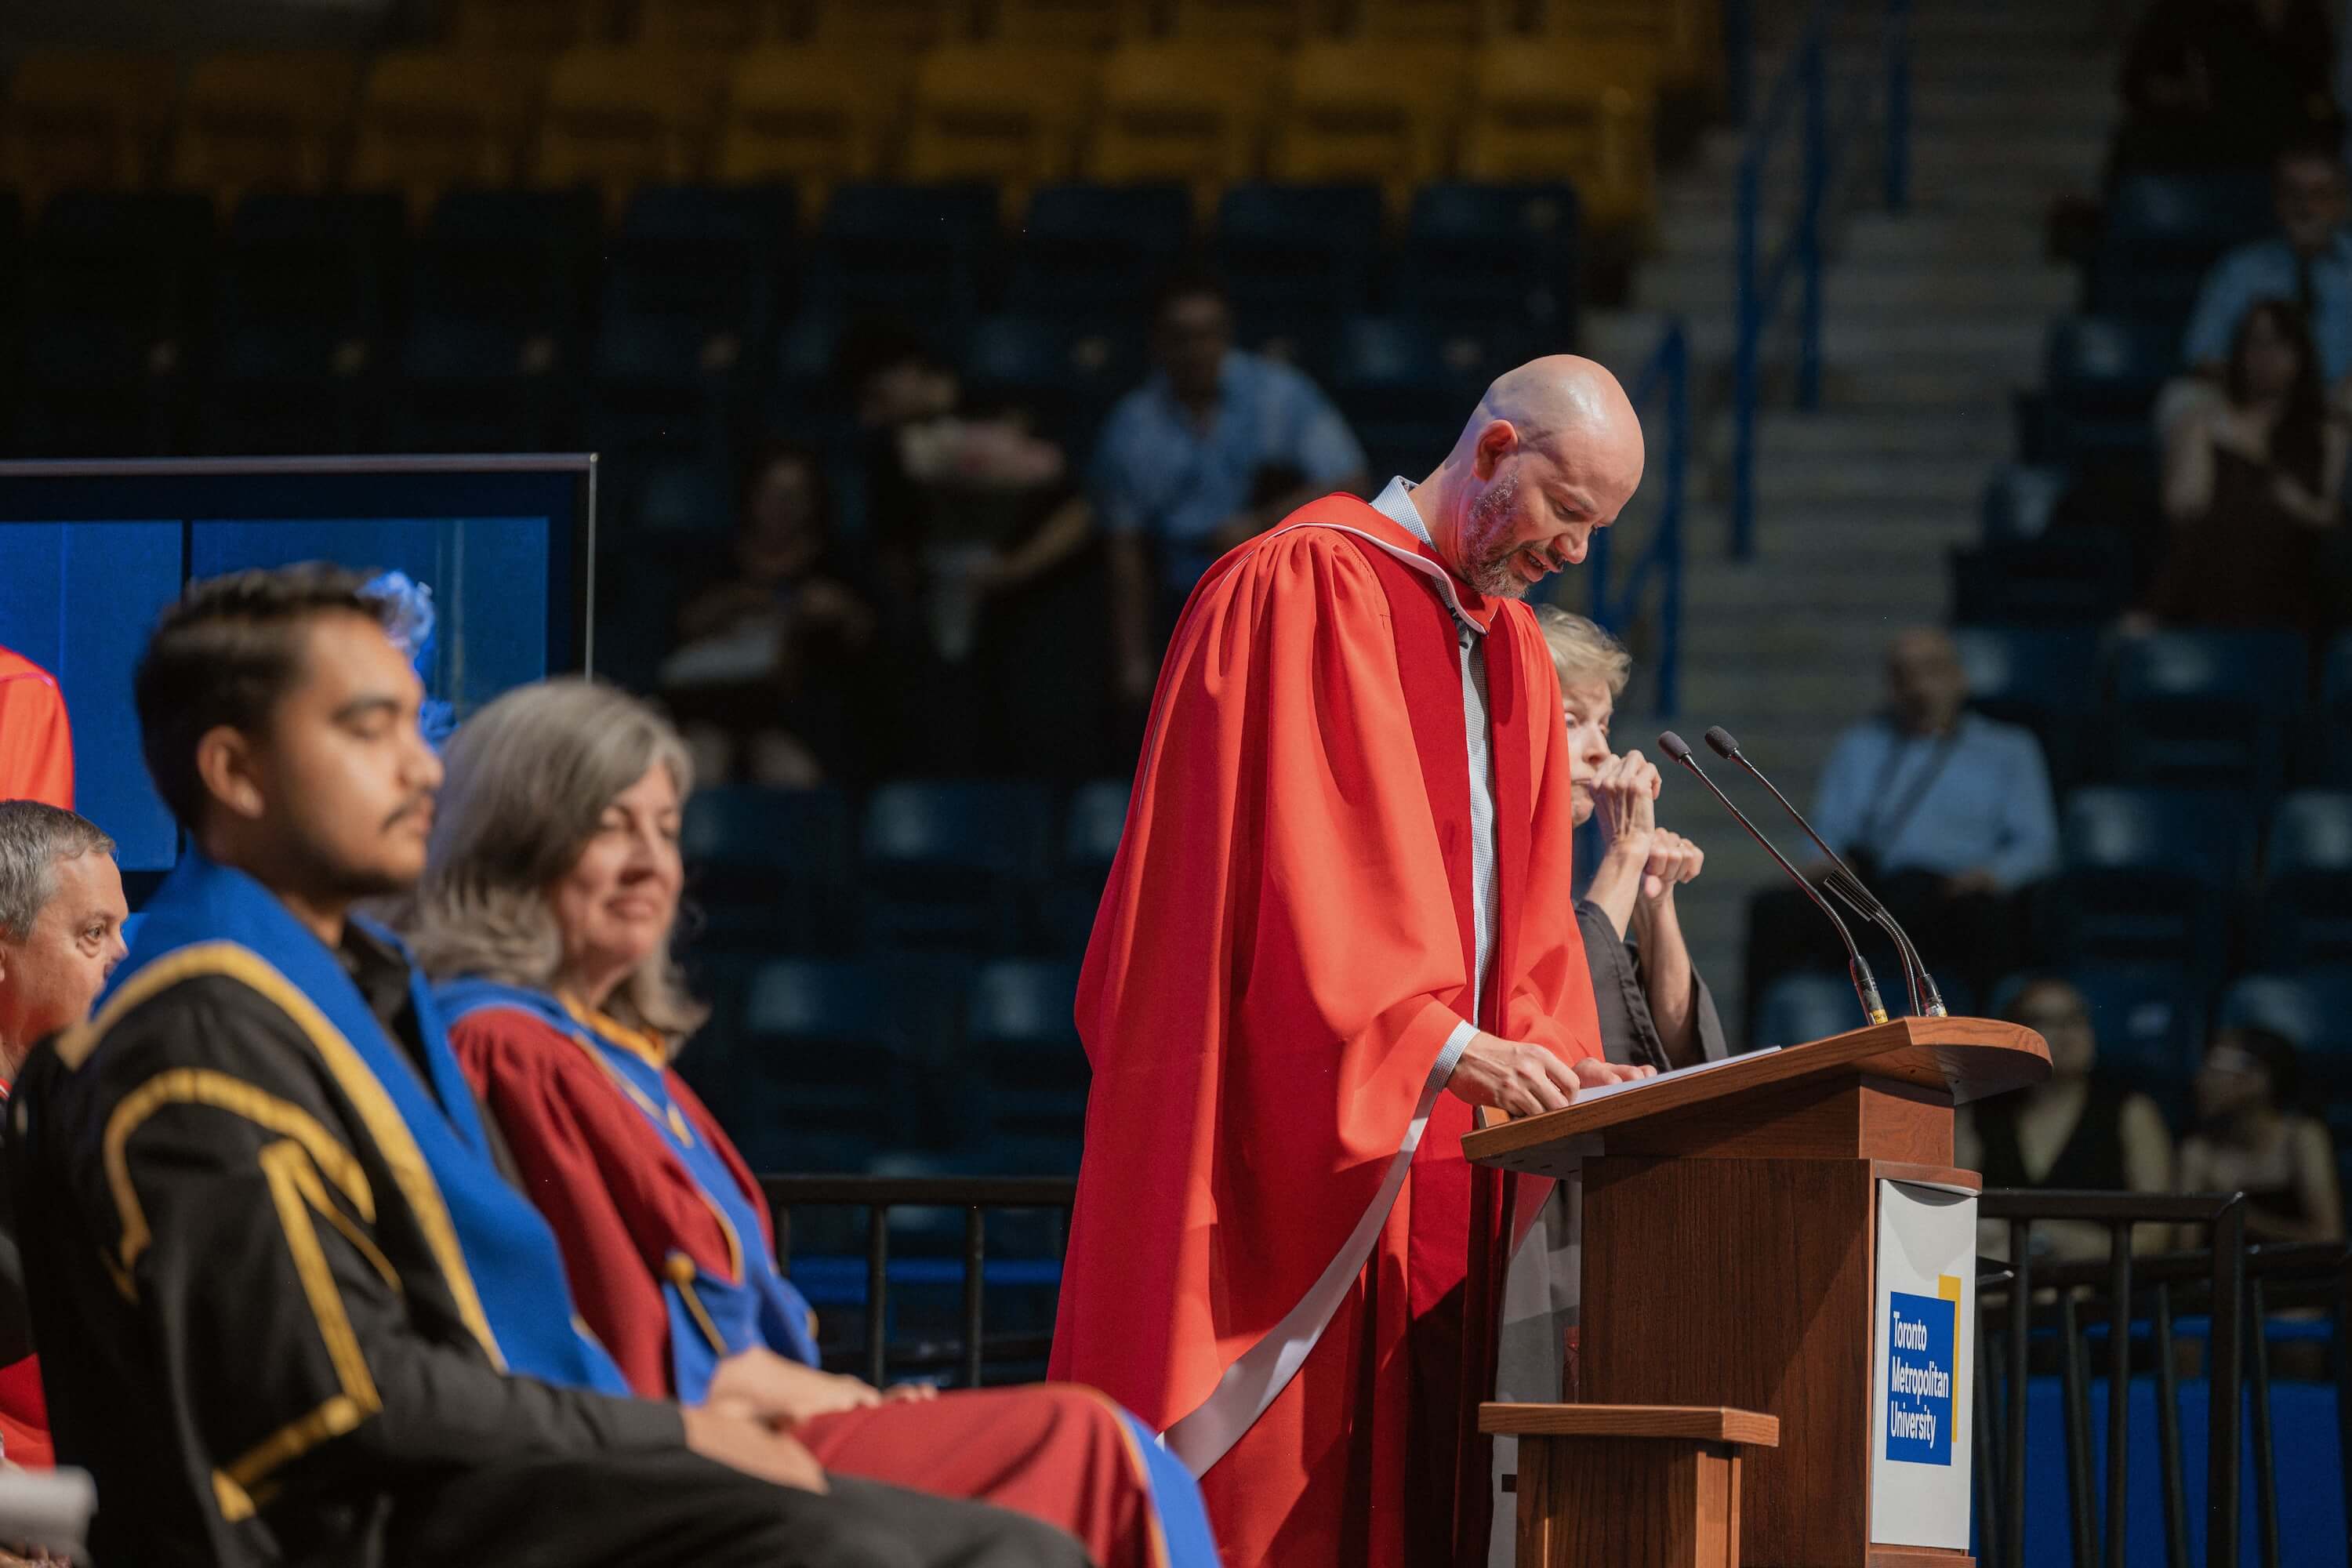 Dean Graham Hudson speaking from a podium on the stage at Convocation.